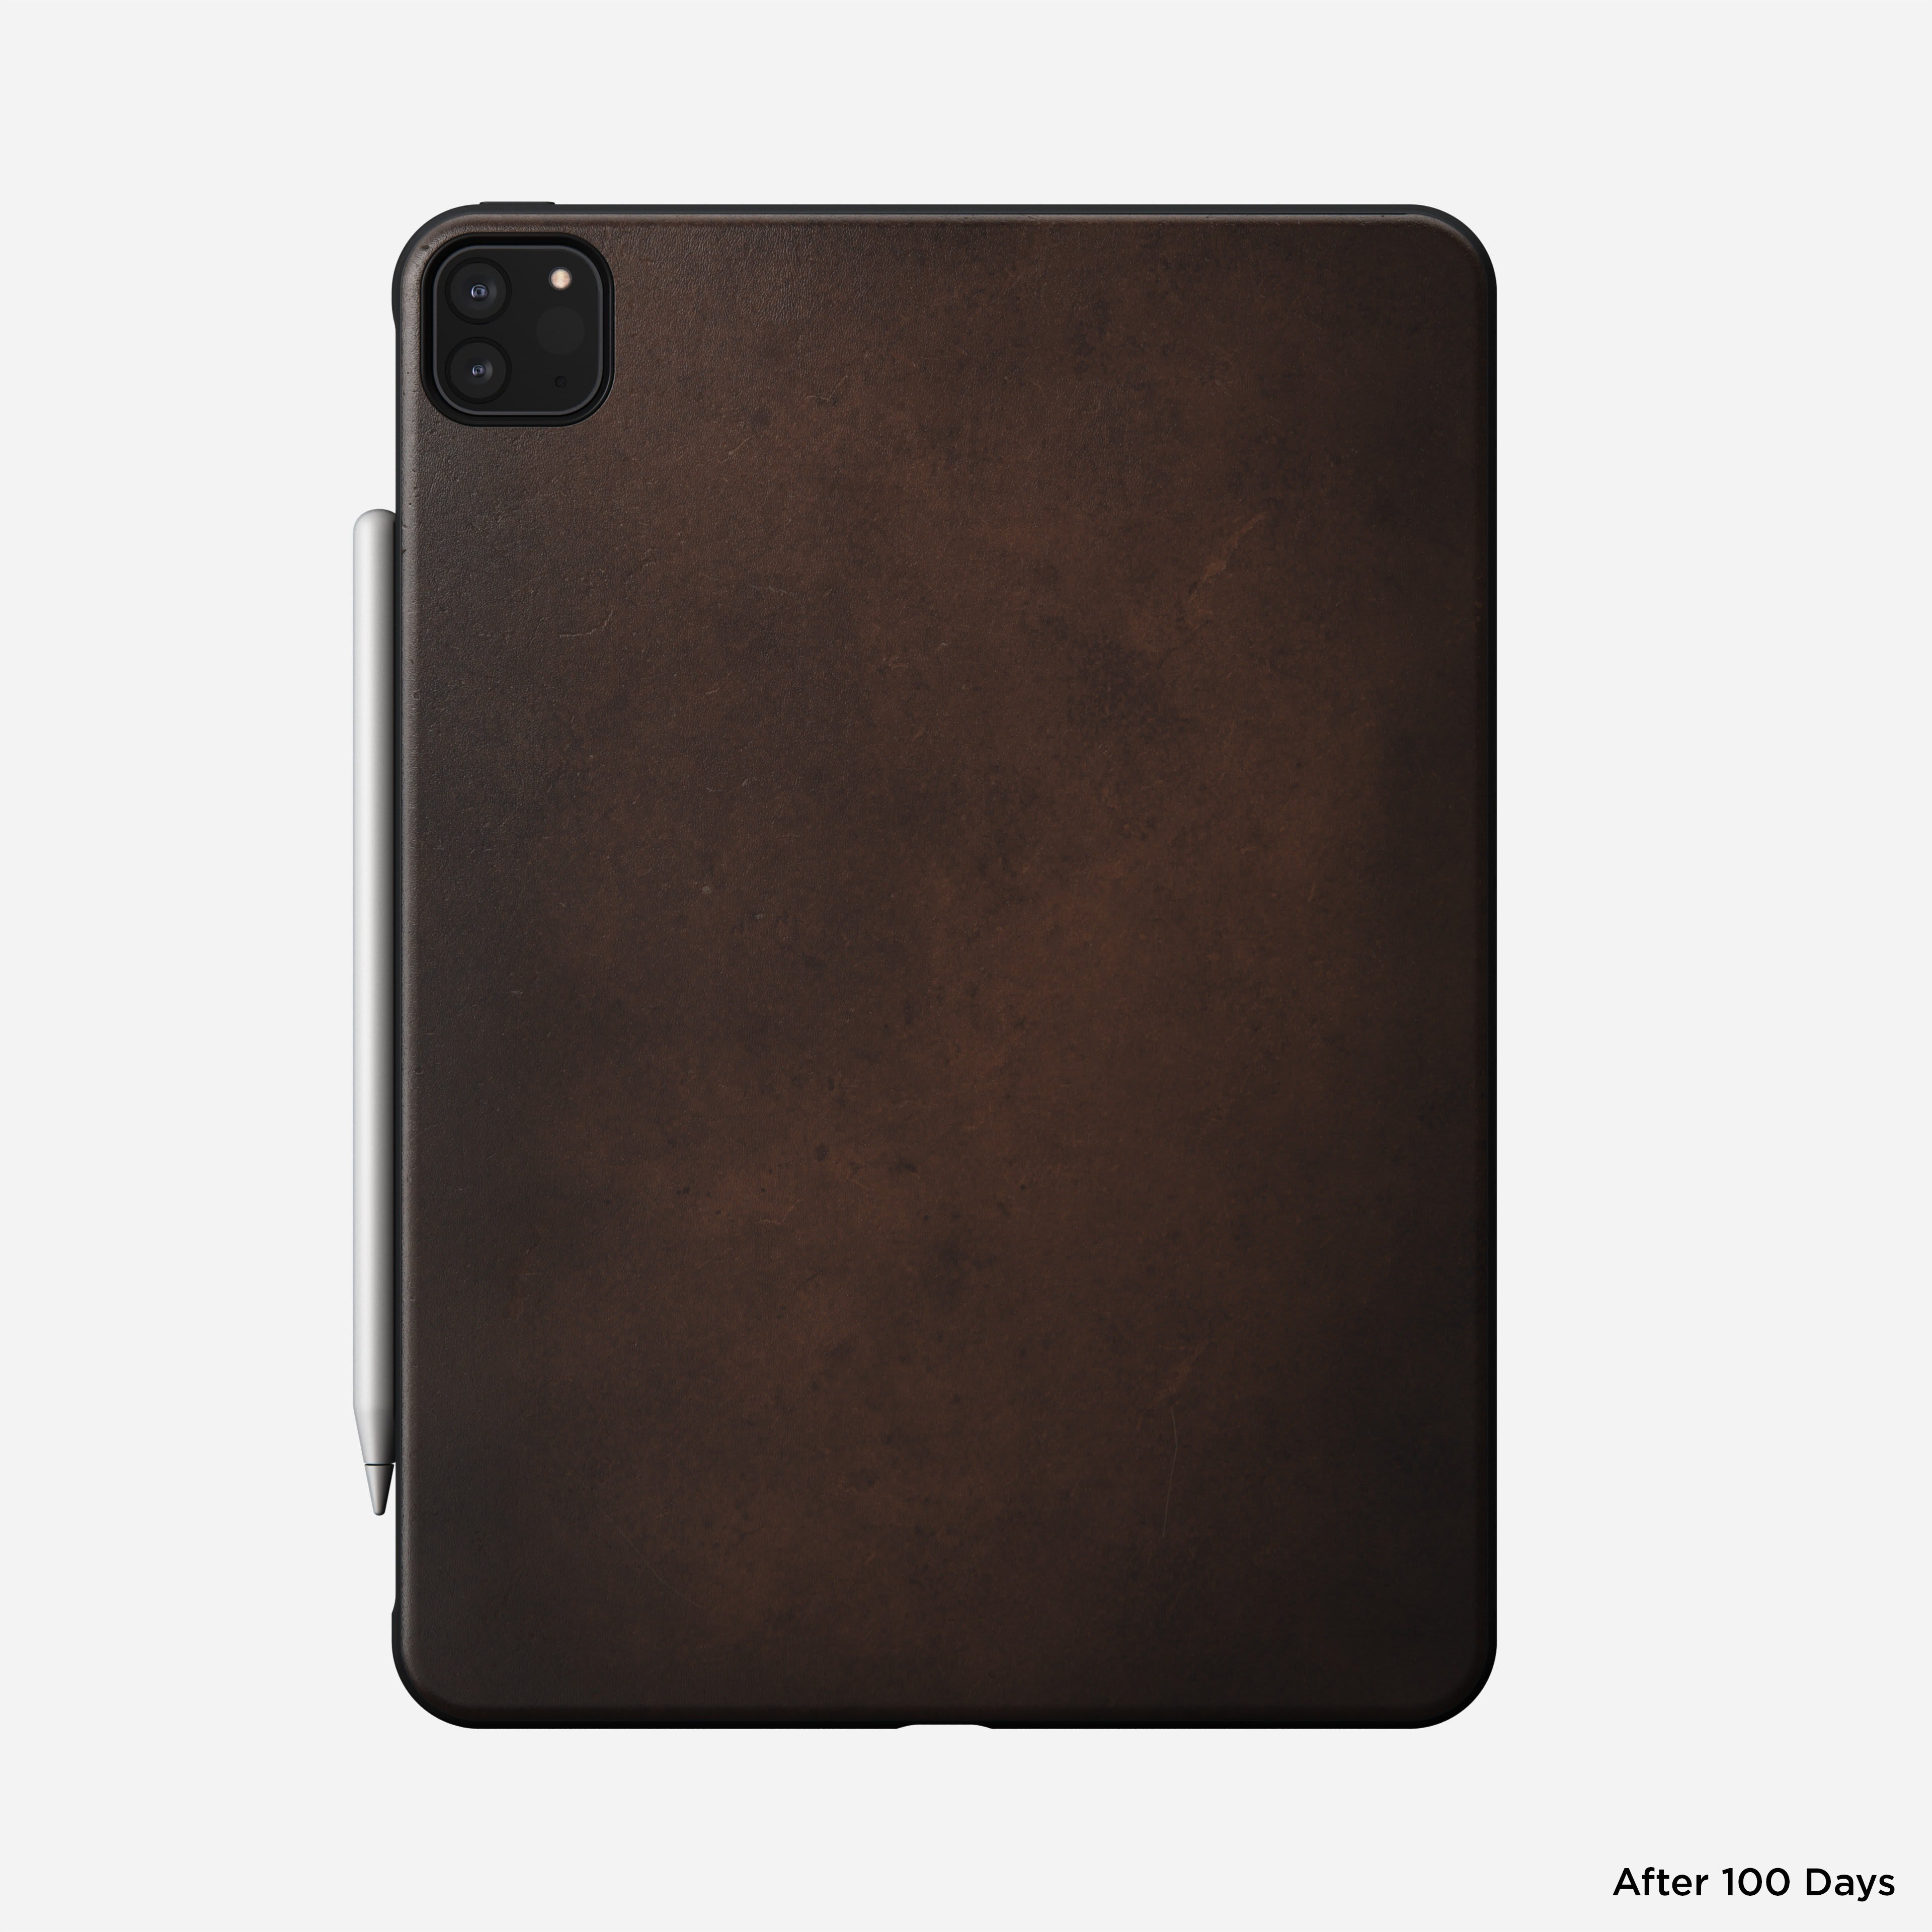 Rugged case horween leather rustic brown ipad pro 11 inch 2nd generation 